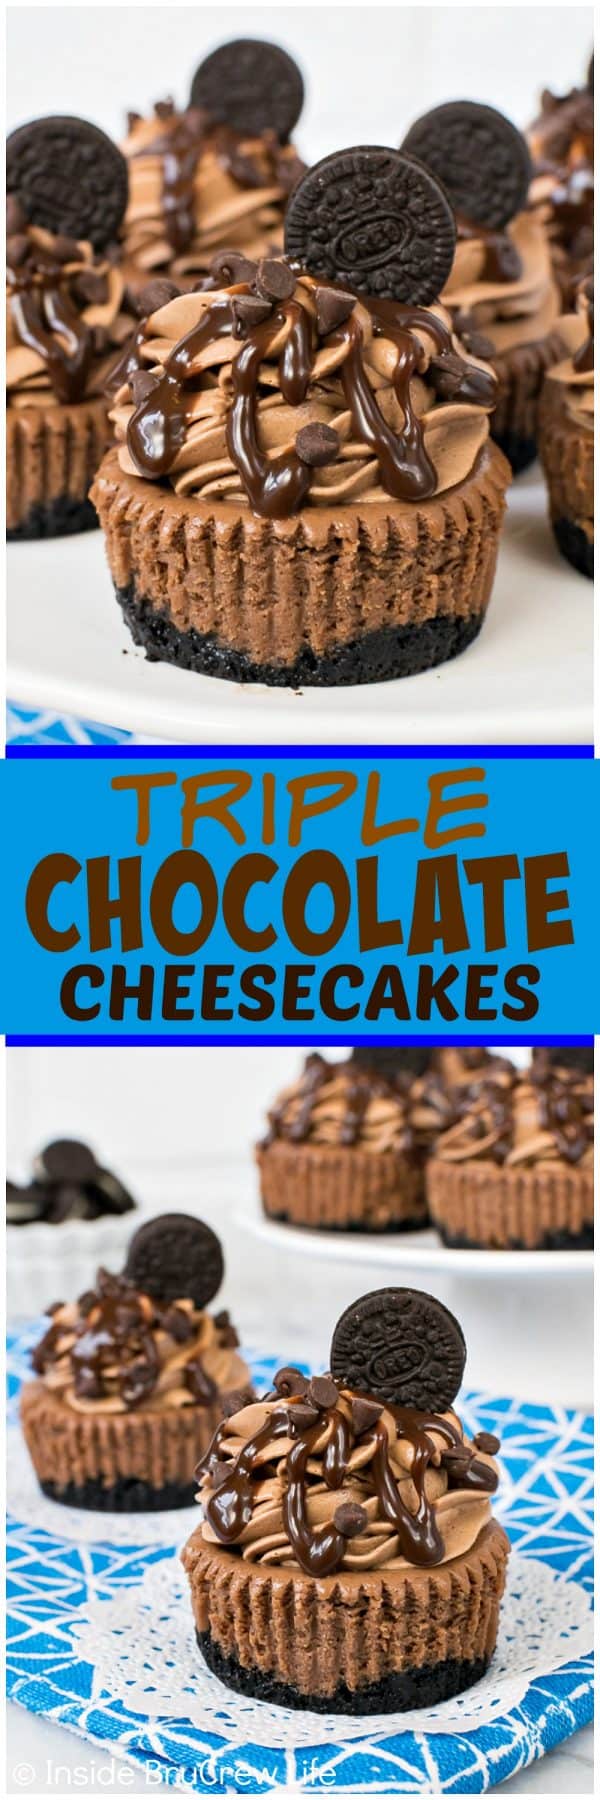 Mini Triple Chocolate Cheesecakes - putting chocolate into every layer of these mini cheesecakes makes them absolutely dreamy! Great recipe for chocolate lovers! #chocolate #cheesecake #chocolatelovers #Oreocookies #minidesserts #recipe #dessert